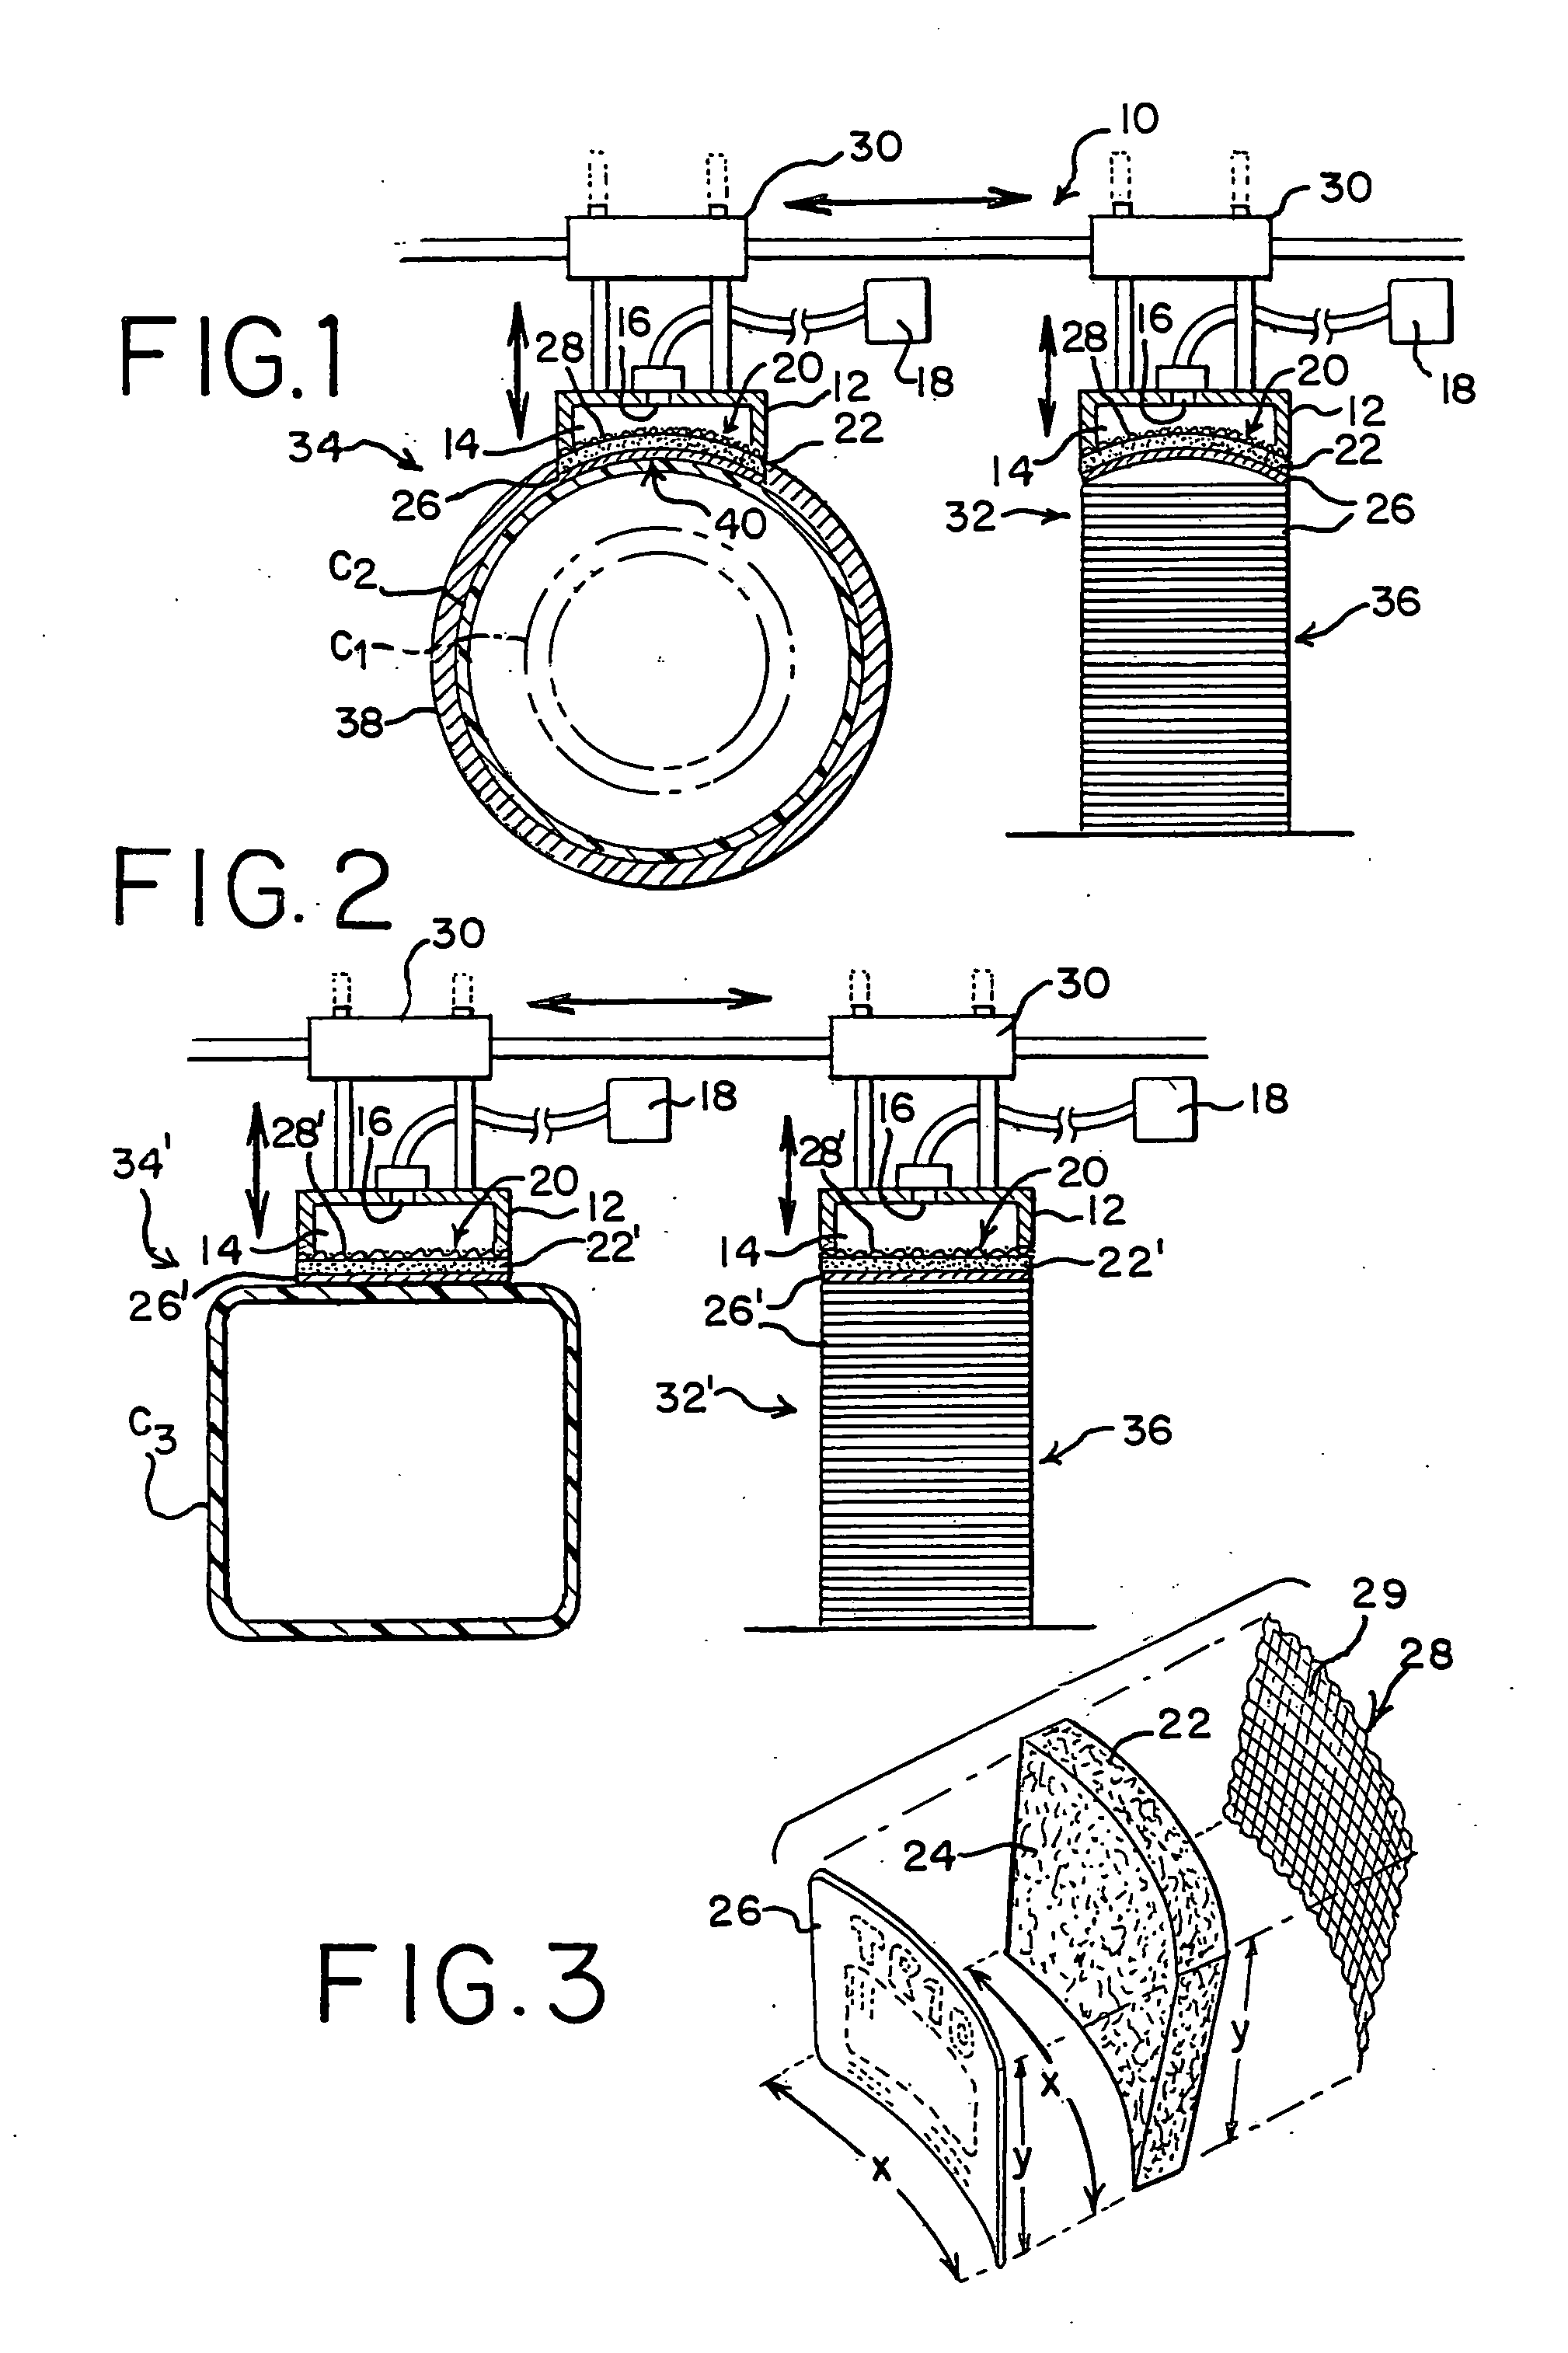 Vaccum support and transfer of flexible material